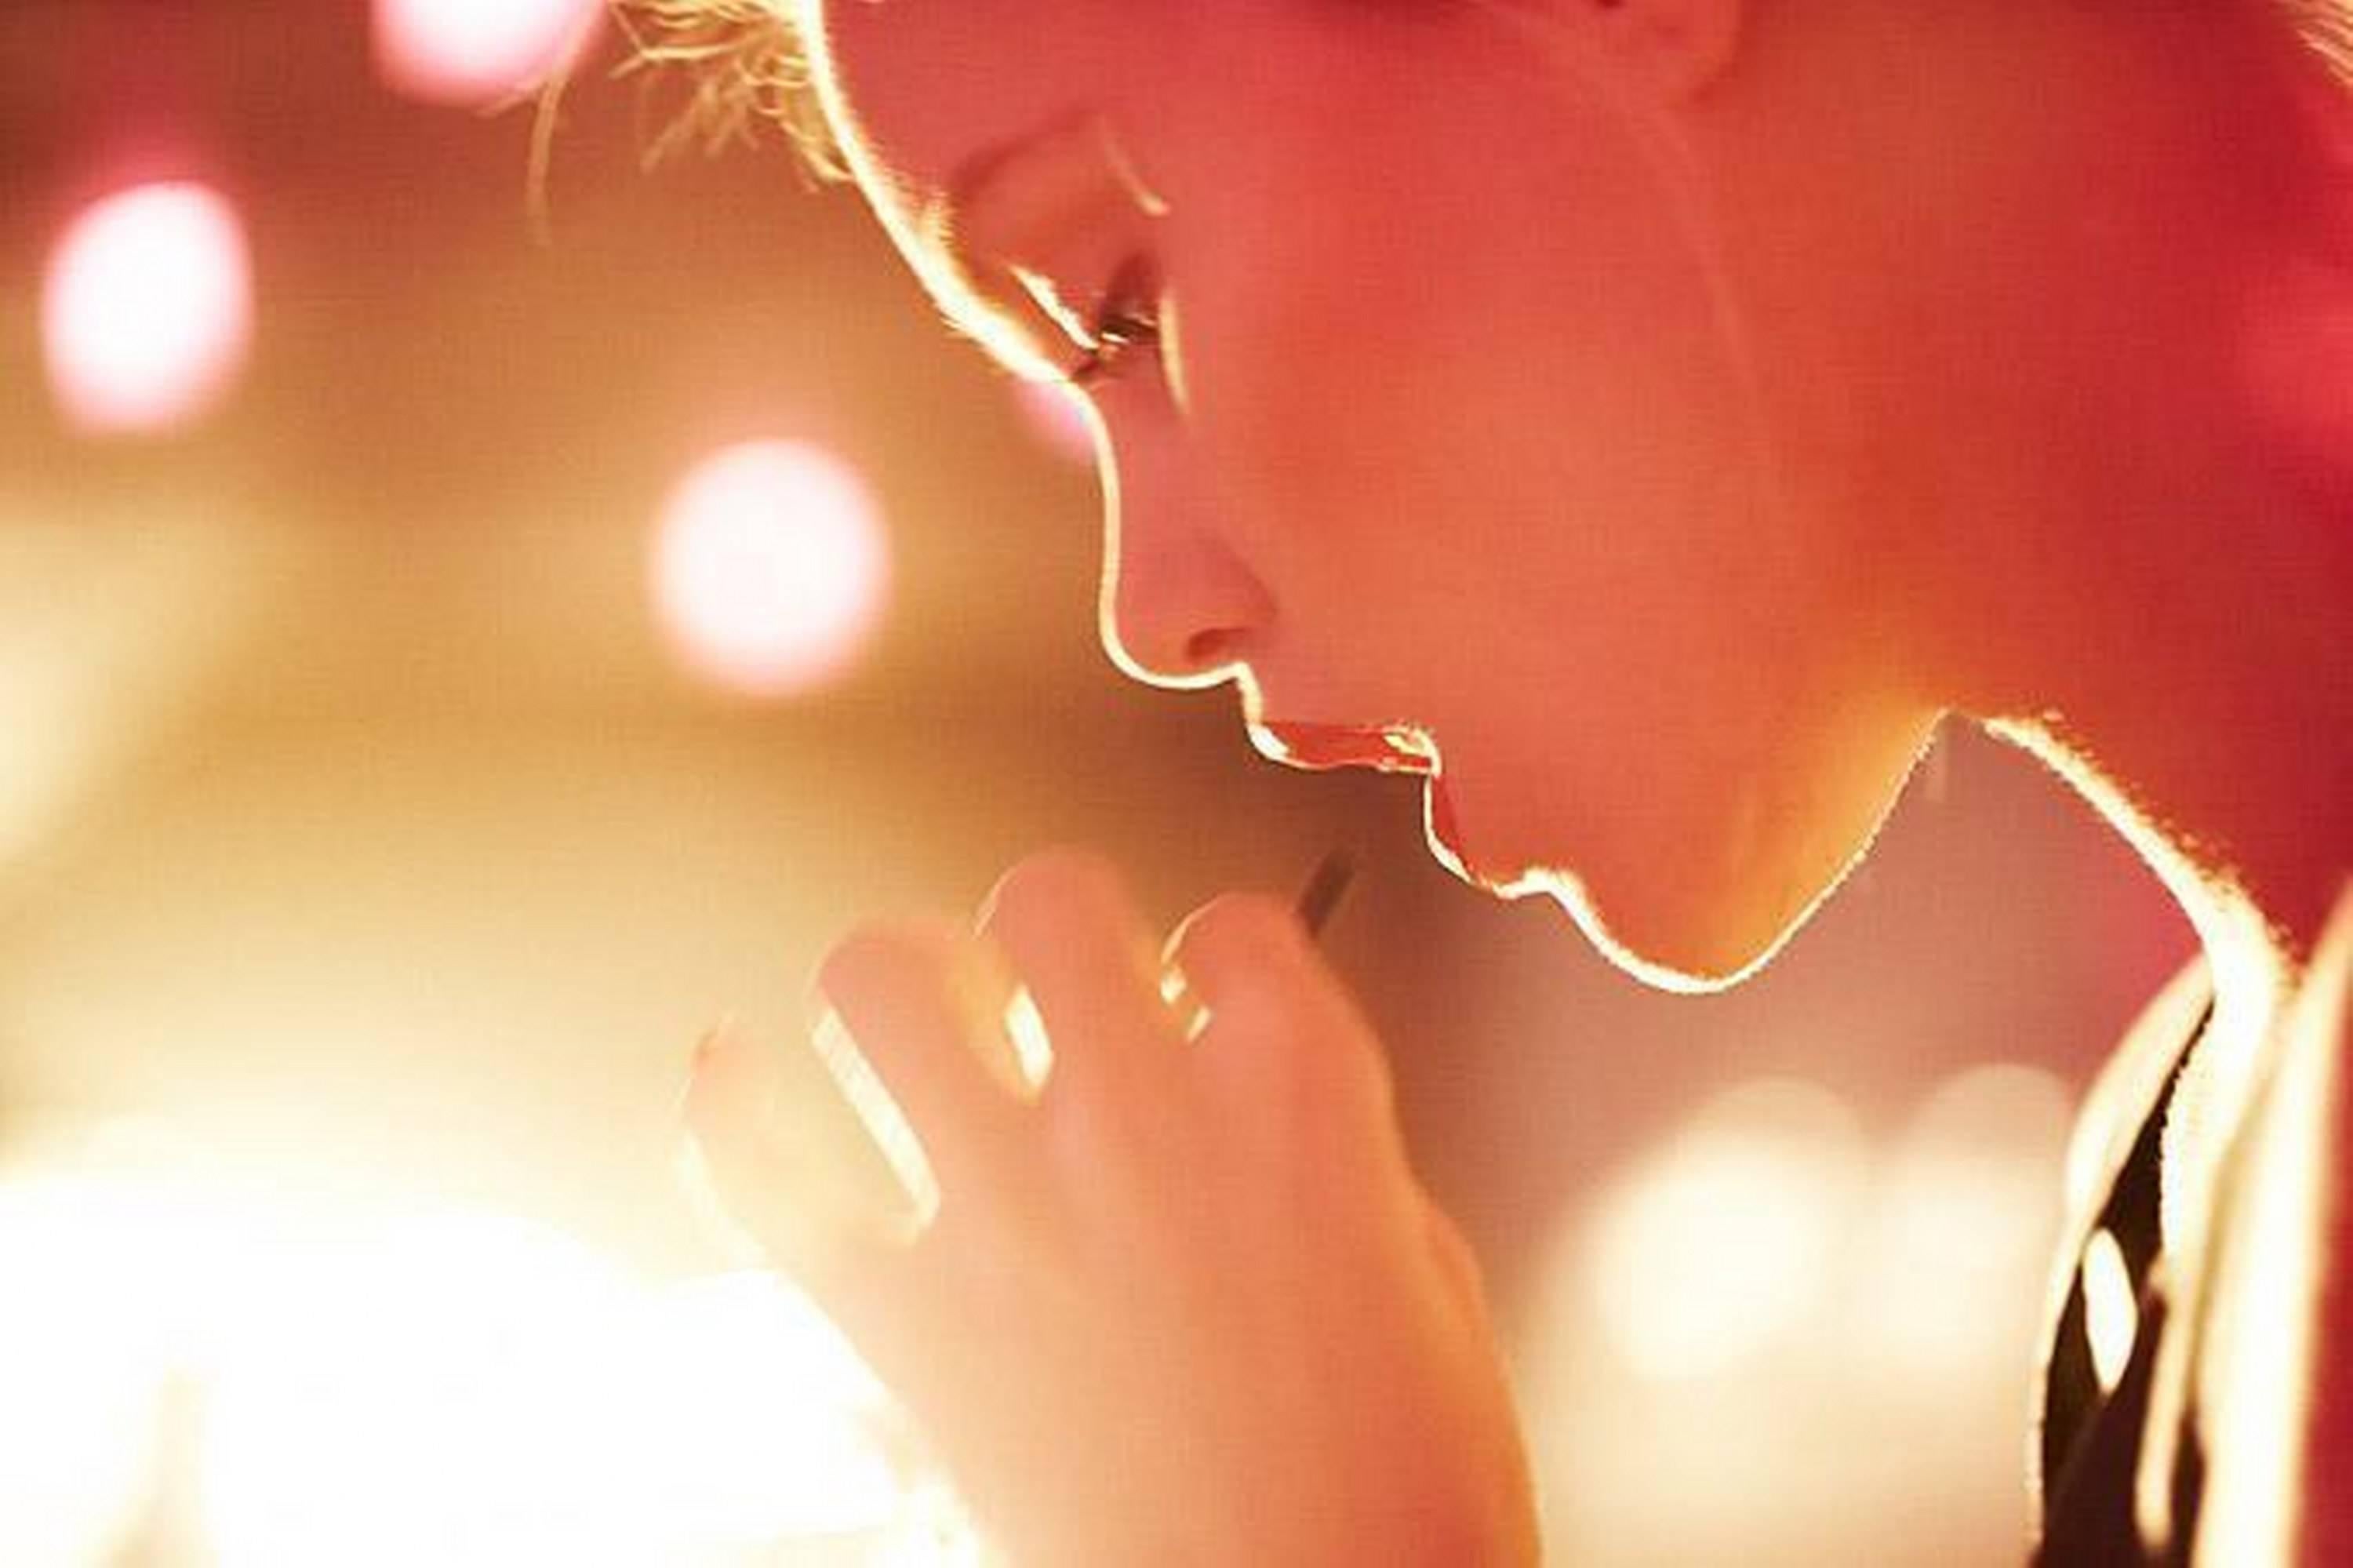 Guy Aroch Color Photograph - Untitled Face of blonde woman in sunlight drinking from straw